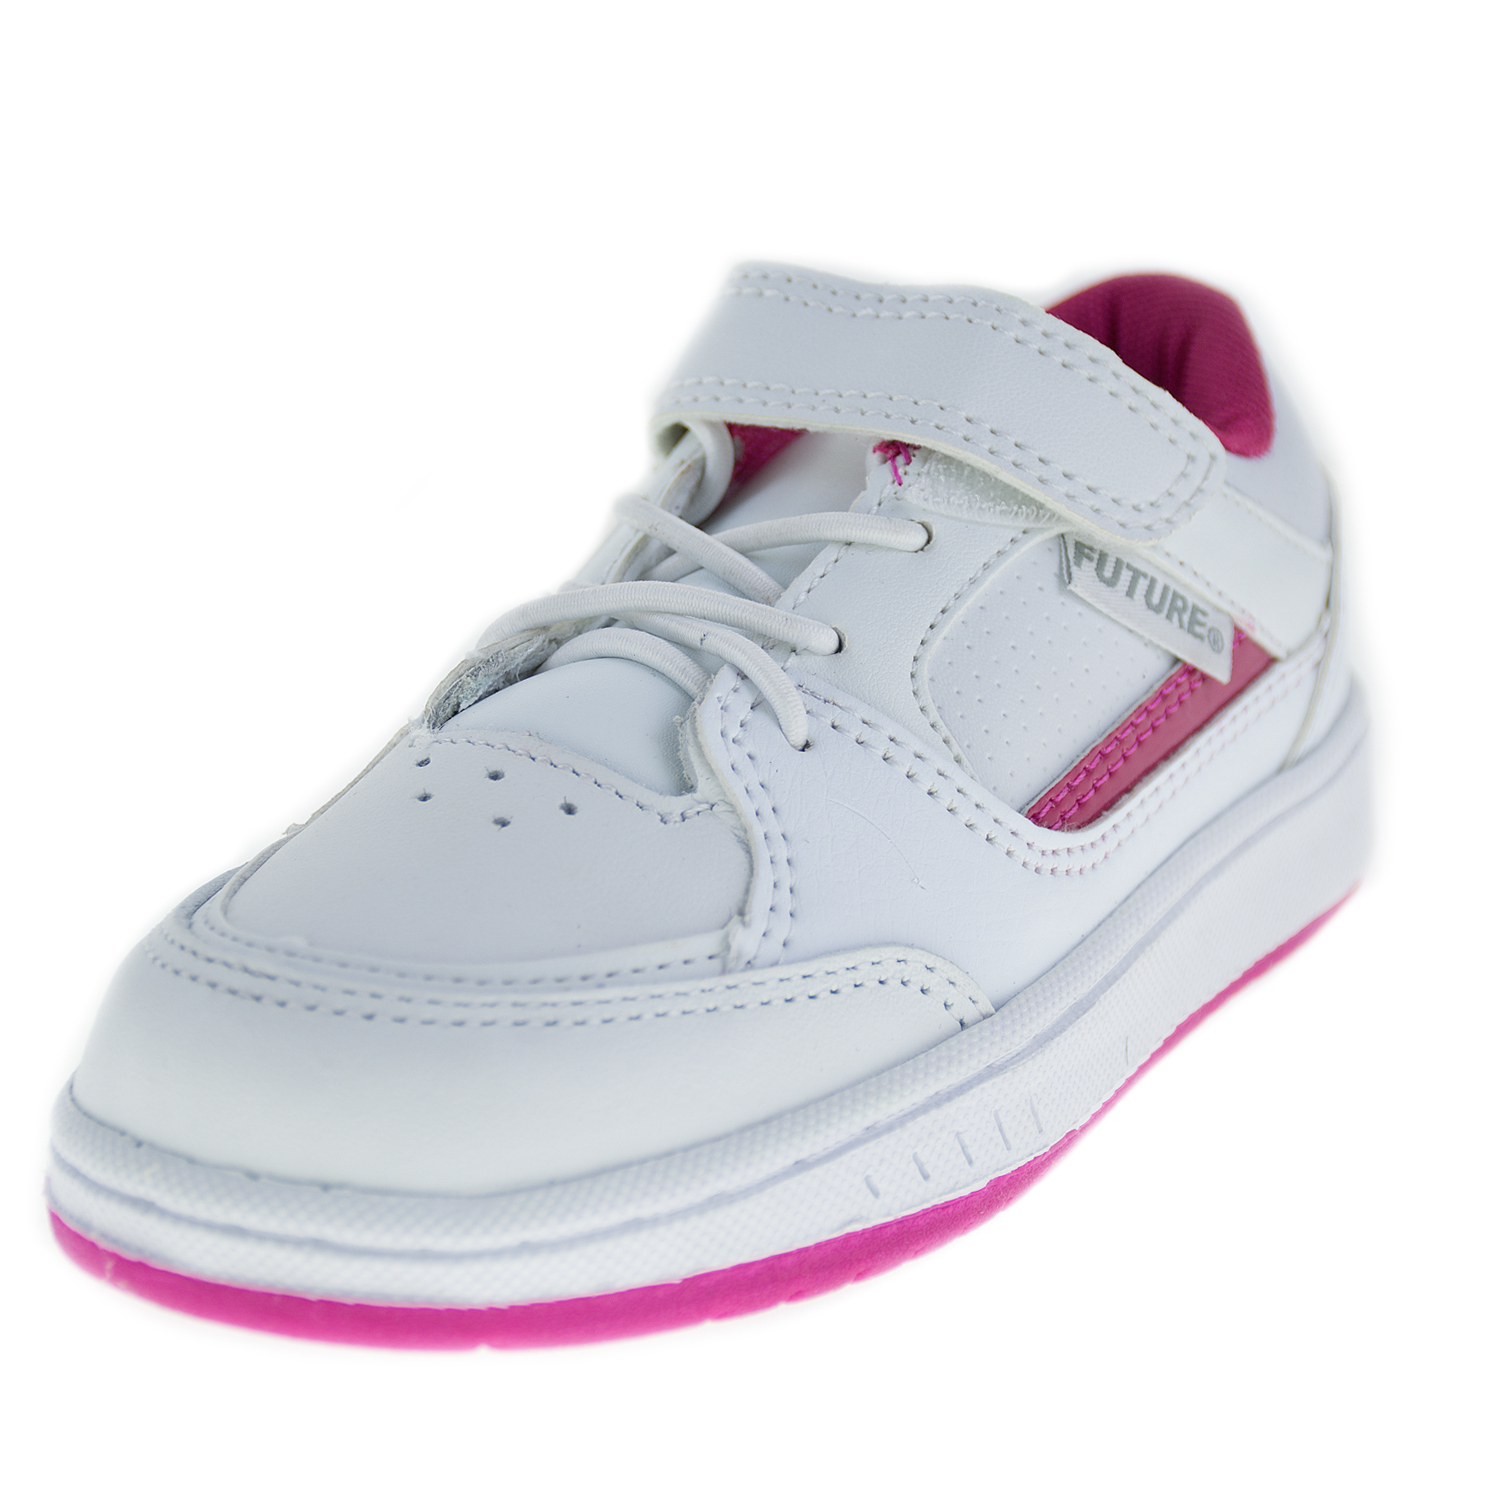 Girl's white with pink leather hook and loop tennis shoes - Girls' Shoes